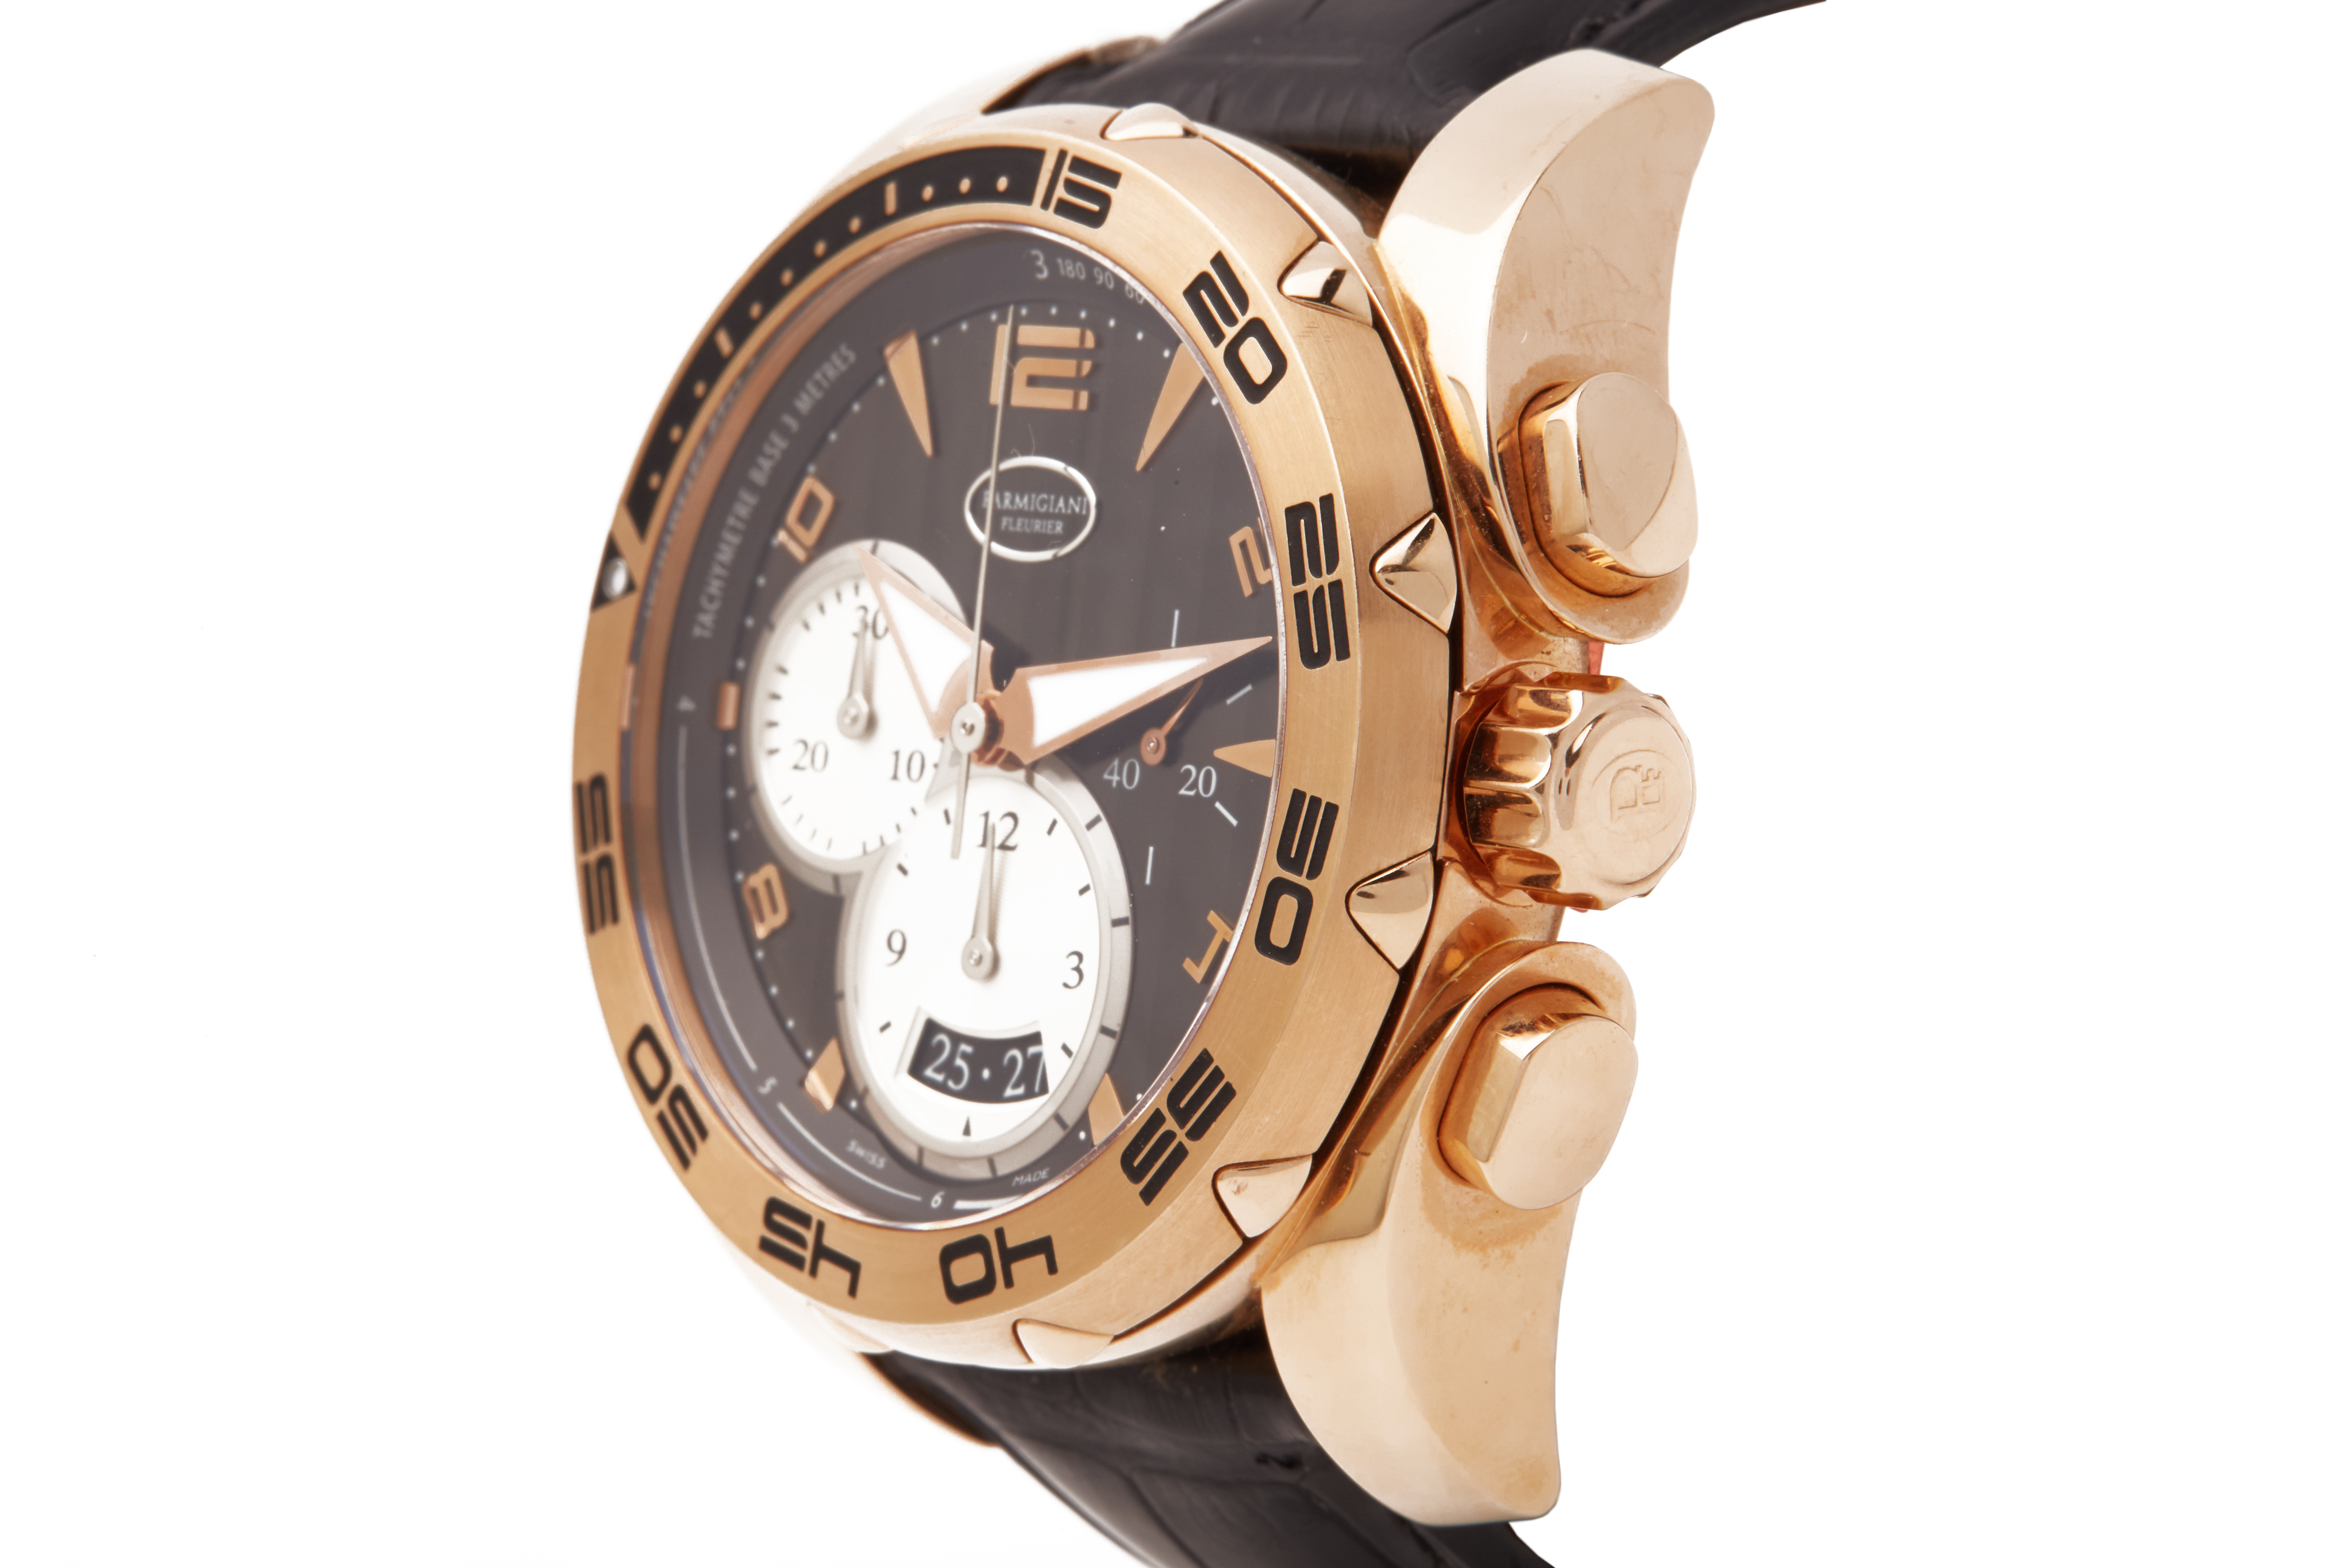 PARMIGIANI FLEURIER PERSHING 005 GOLD CHRONOGRAPH WATCH - Image 3 of 7